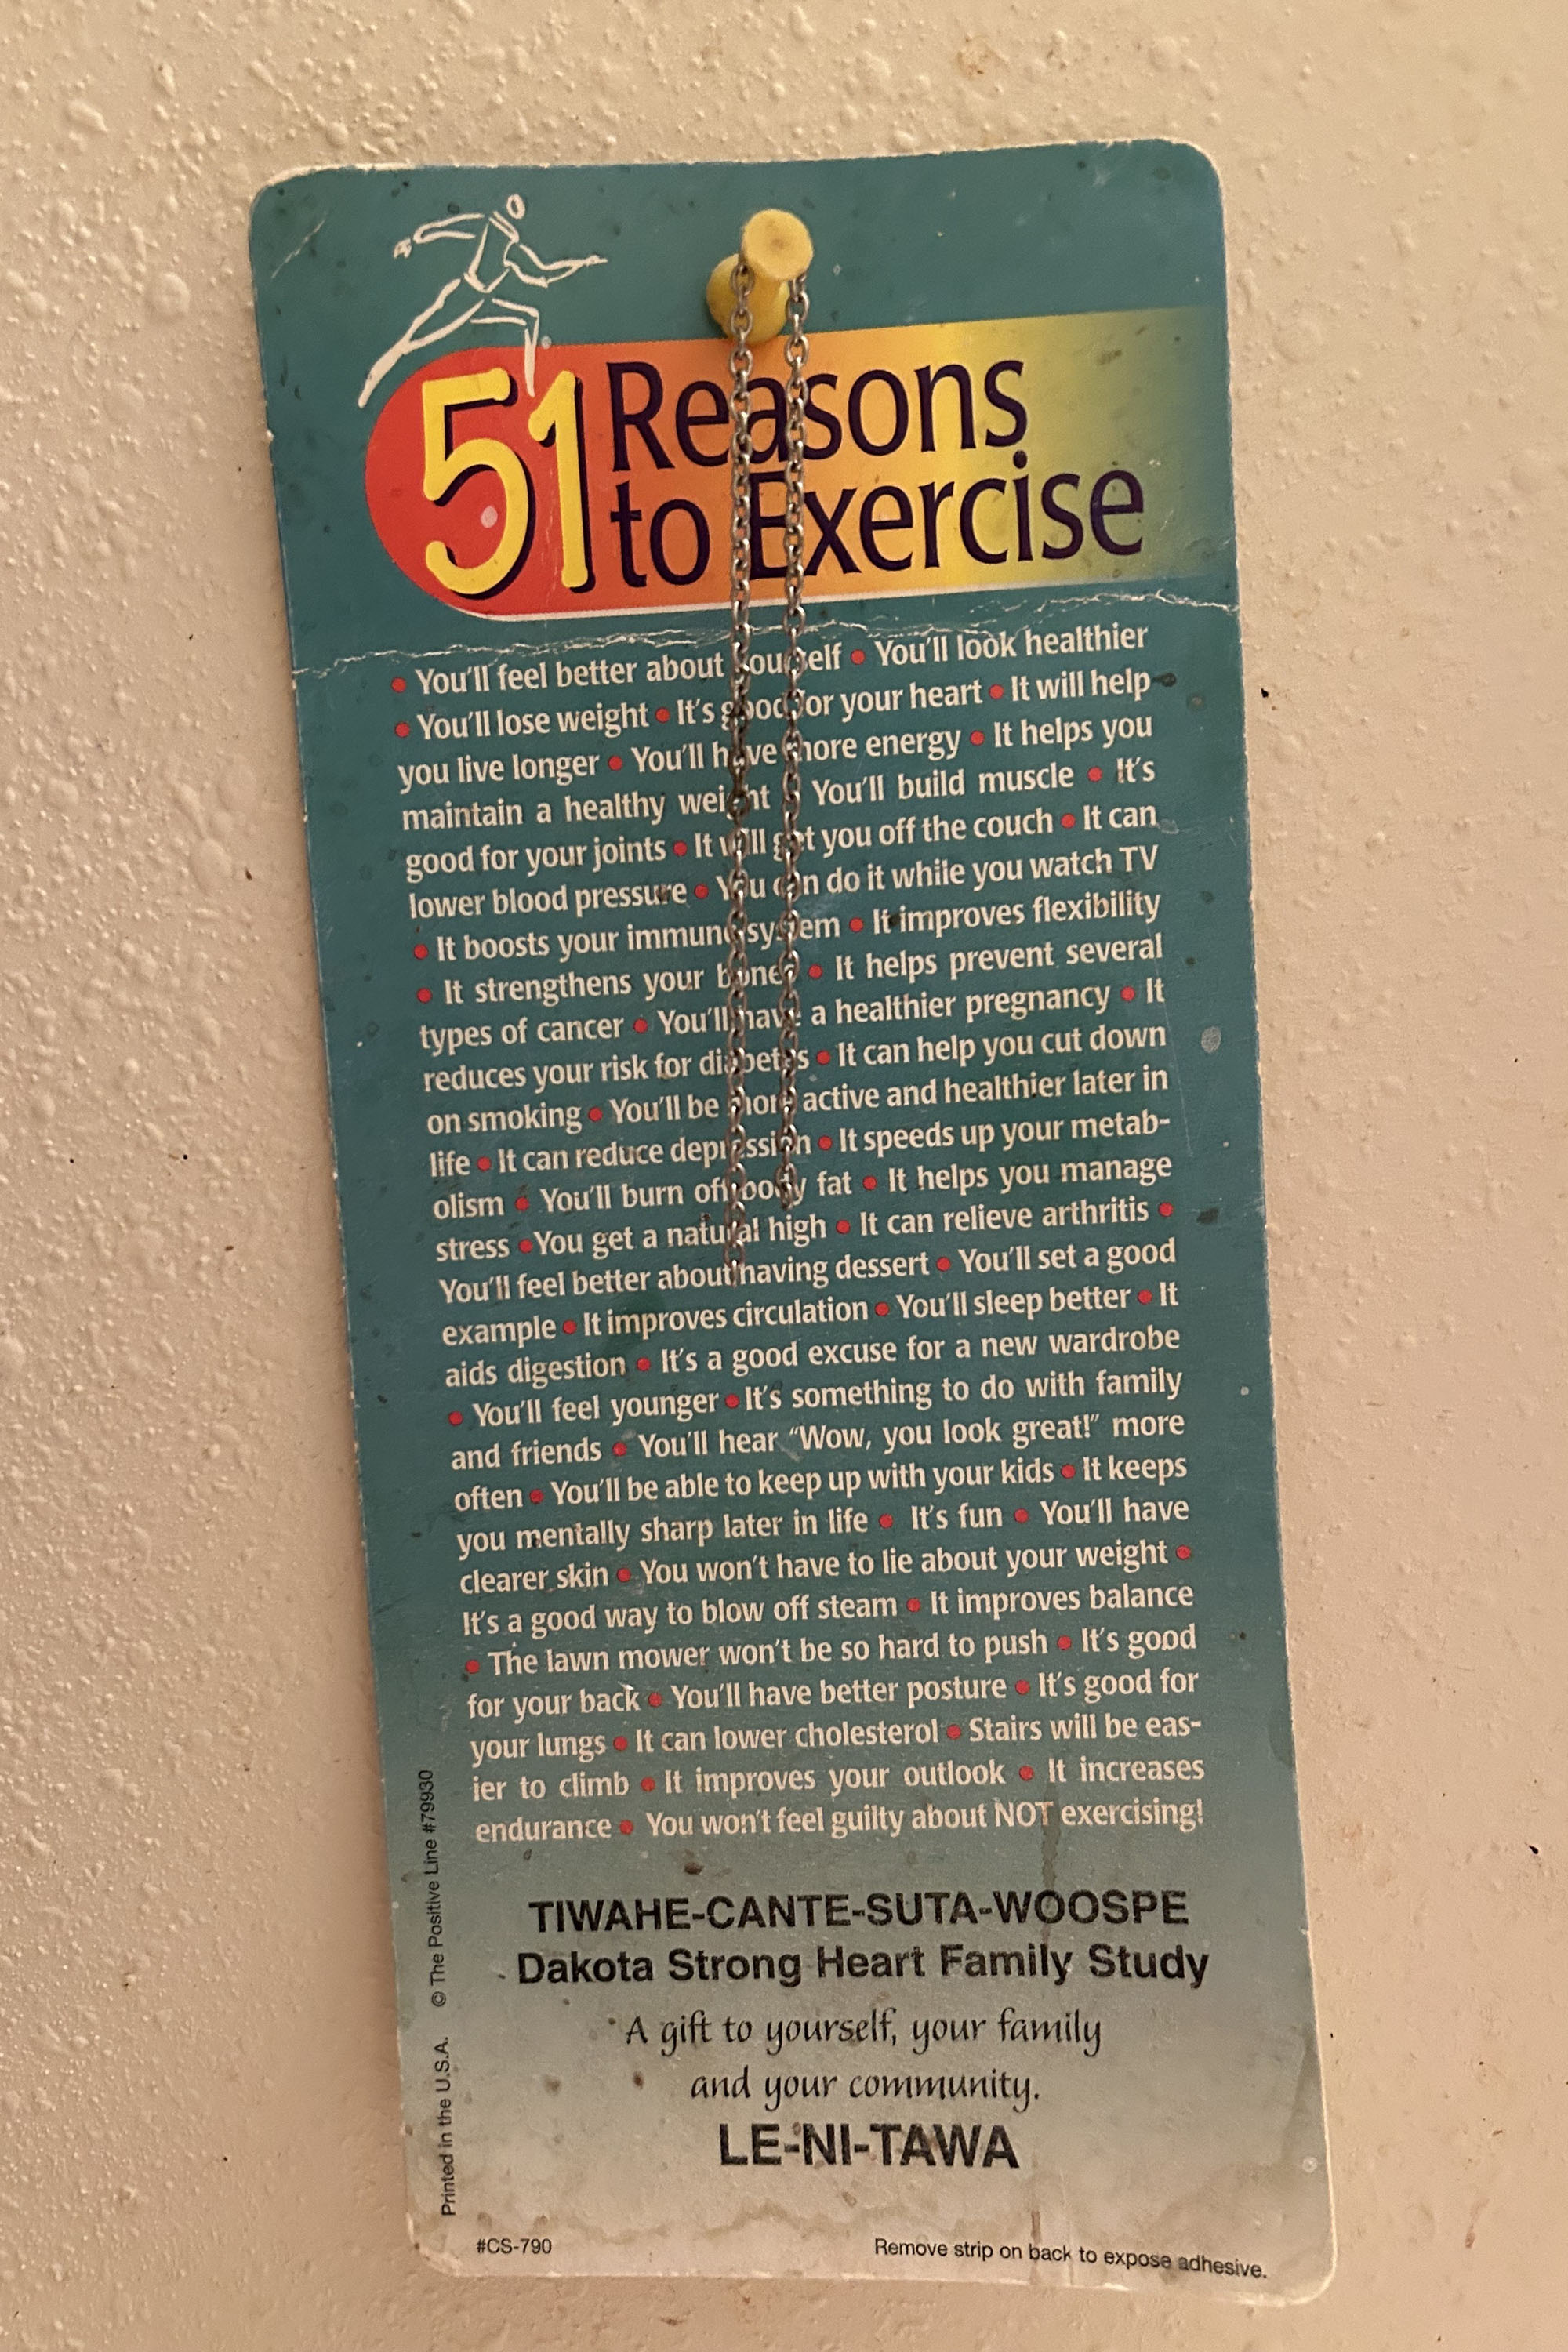 A sign that says, "51 Reasons to Exercise." The reasons are listed in a small white font in a dense block of text separated by red bullet points. At the bottom, it reads "TIWAHE-CANTE-SUTA-WOOSPE / Dakota Strong Heart Family Study / A gift to yourself, your family, and your community / LE-NI-TAWA"